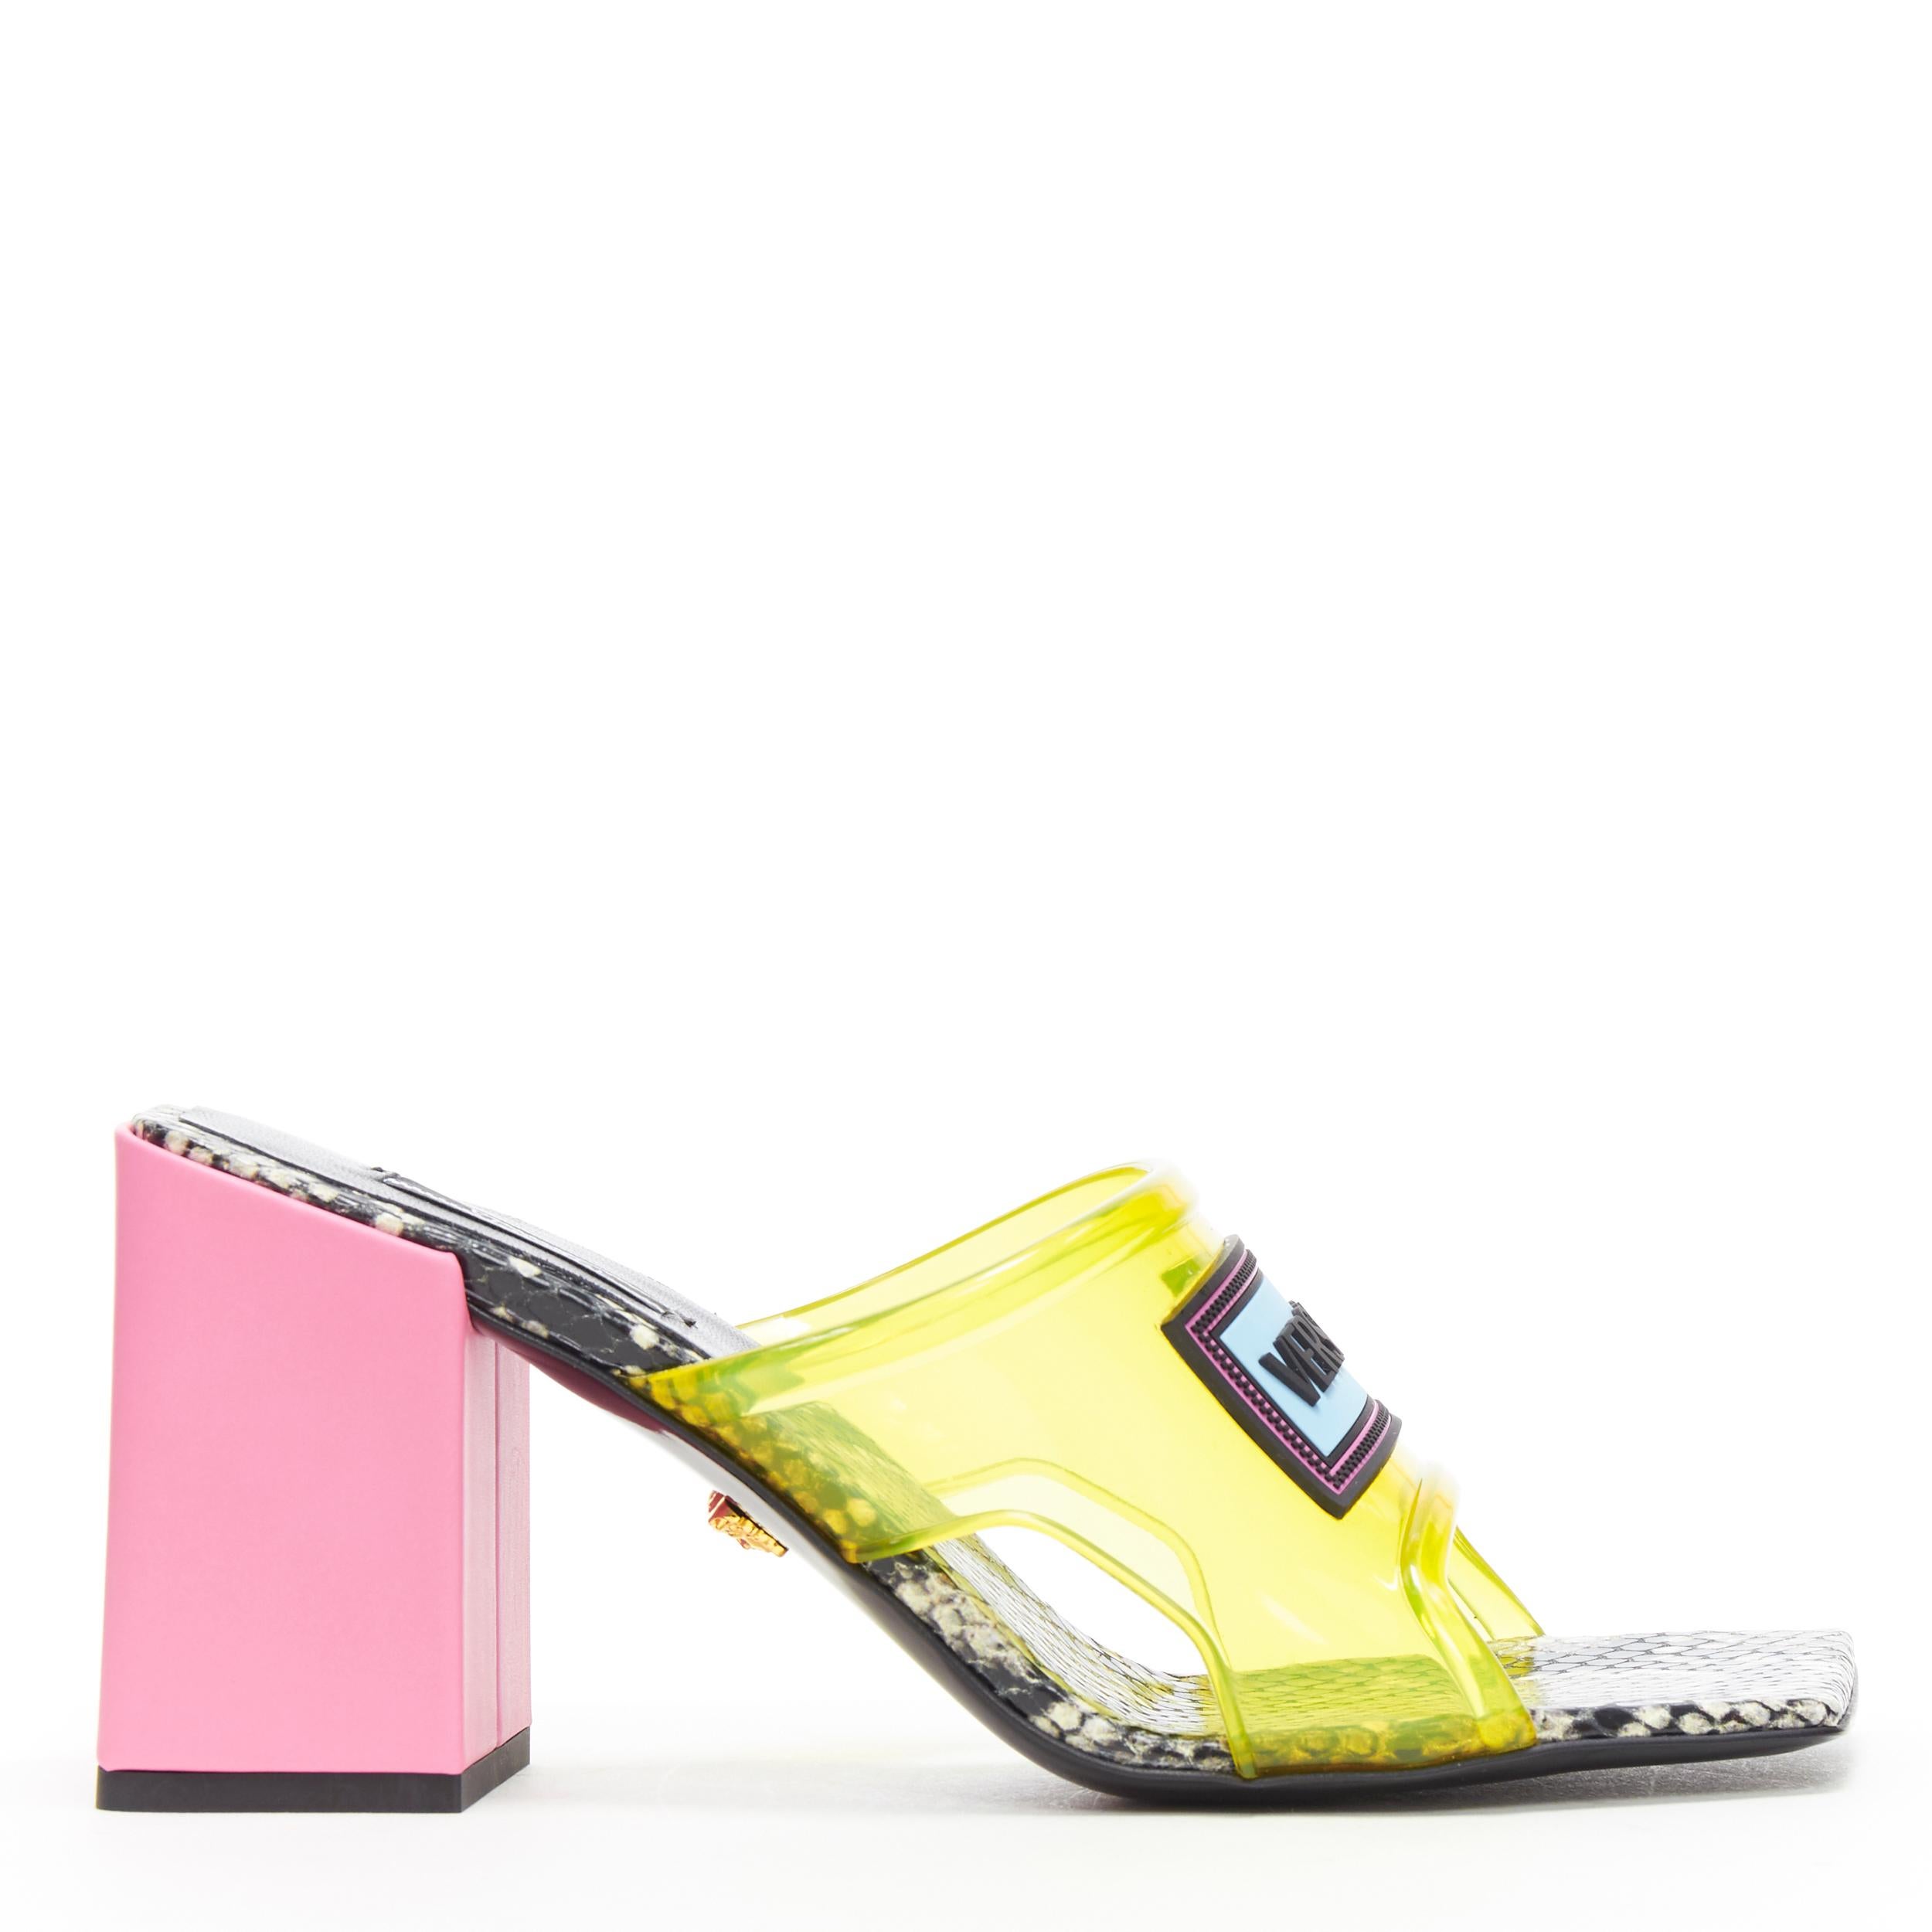 new VERSACE Runway 1990s Vintage Logo yellow PVC pink block heel sandals EU40
Brand: Versace
Designer: Donatella Versace
Collection: 2019
As seen on: Kylie Jenner
Model Name / Style: Mule sandals
Material: PVC
Color: Pink, yellow
Pattern: